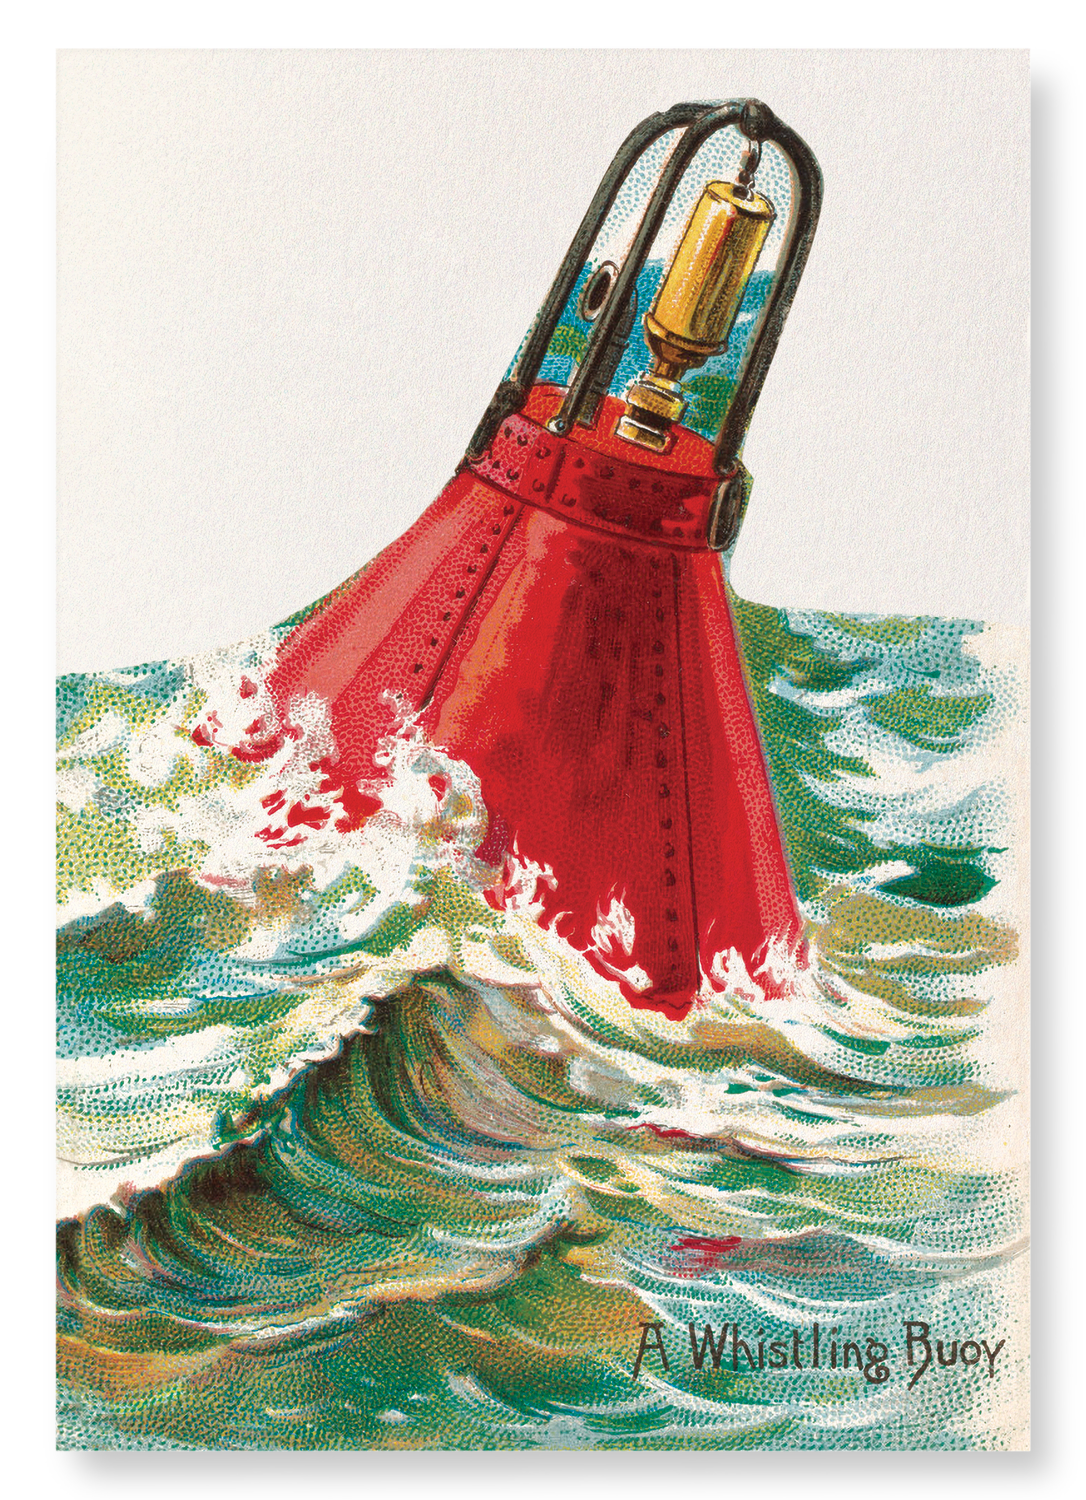 WHISTLING BUOY (1889): Painting Art Print